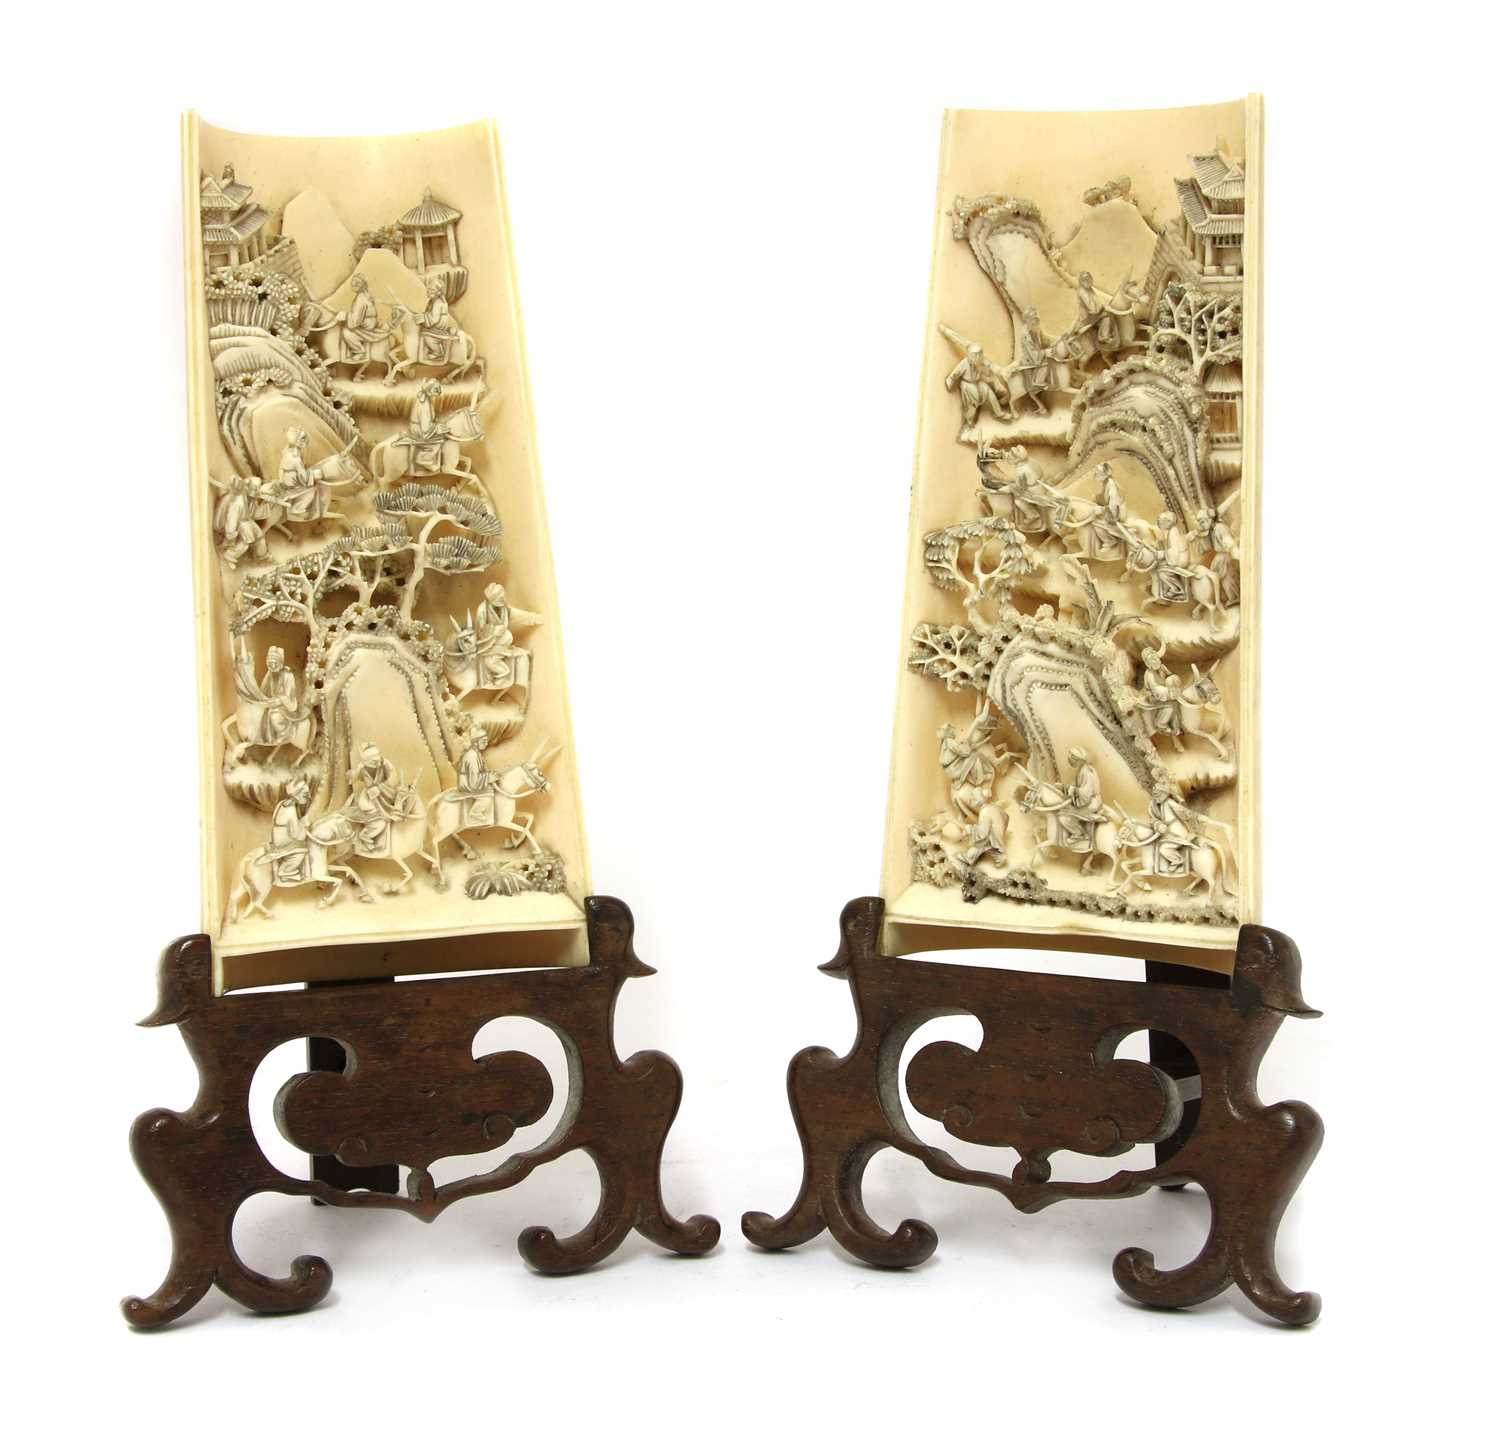 Lot 225 - A pair of Chinese ivory wrist rests